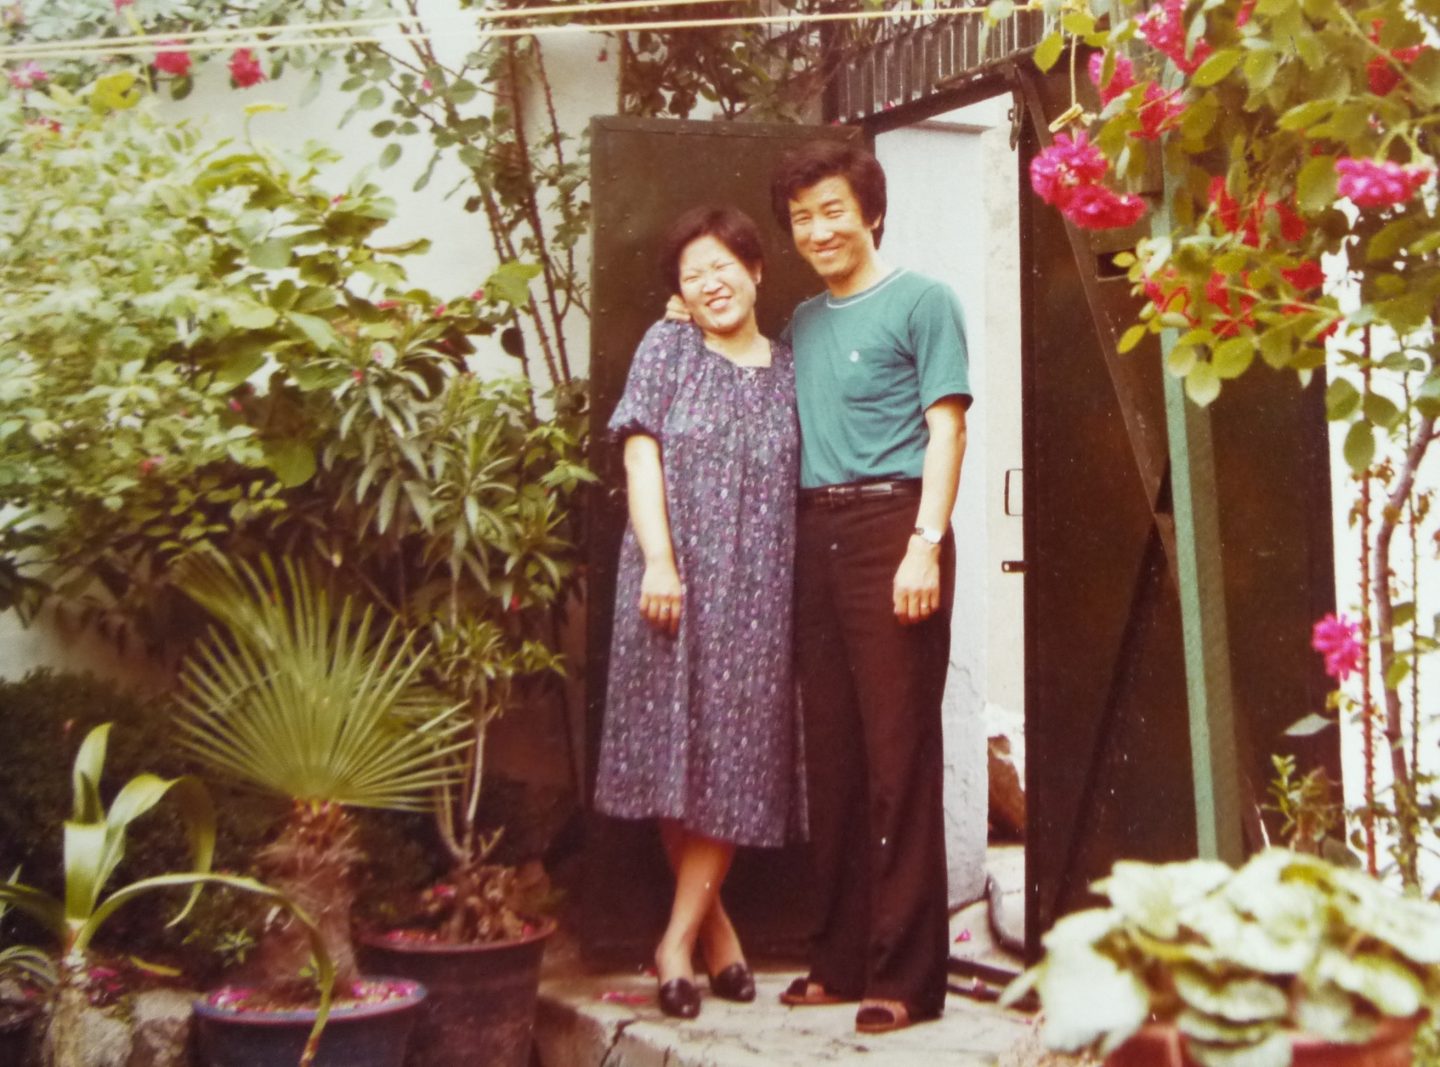 Nan and her husband, Kim Han Jung, during their honeymoon. Drawn together by their common calling for missions in China, they wed after three years of engagement.